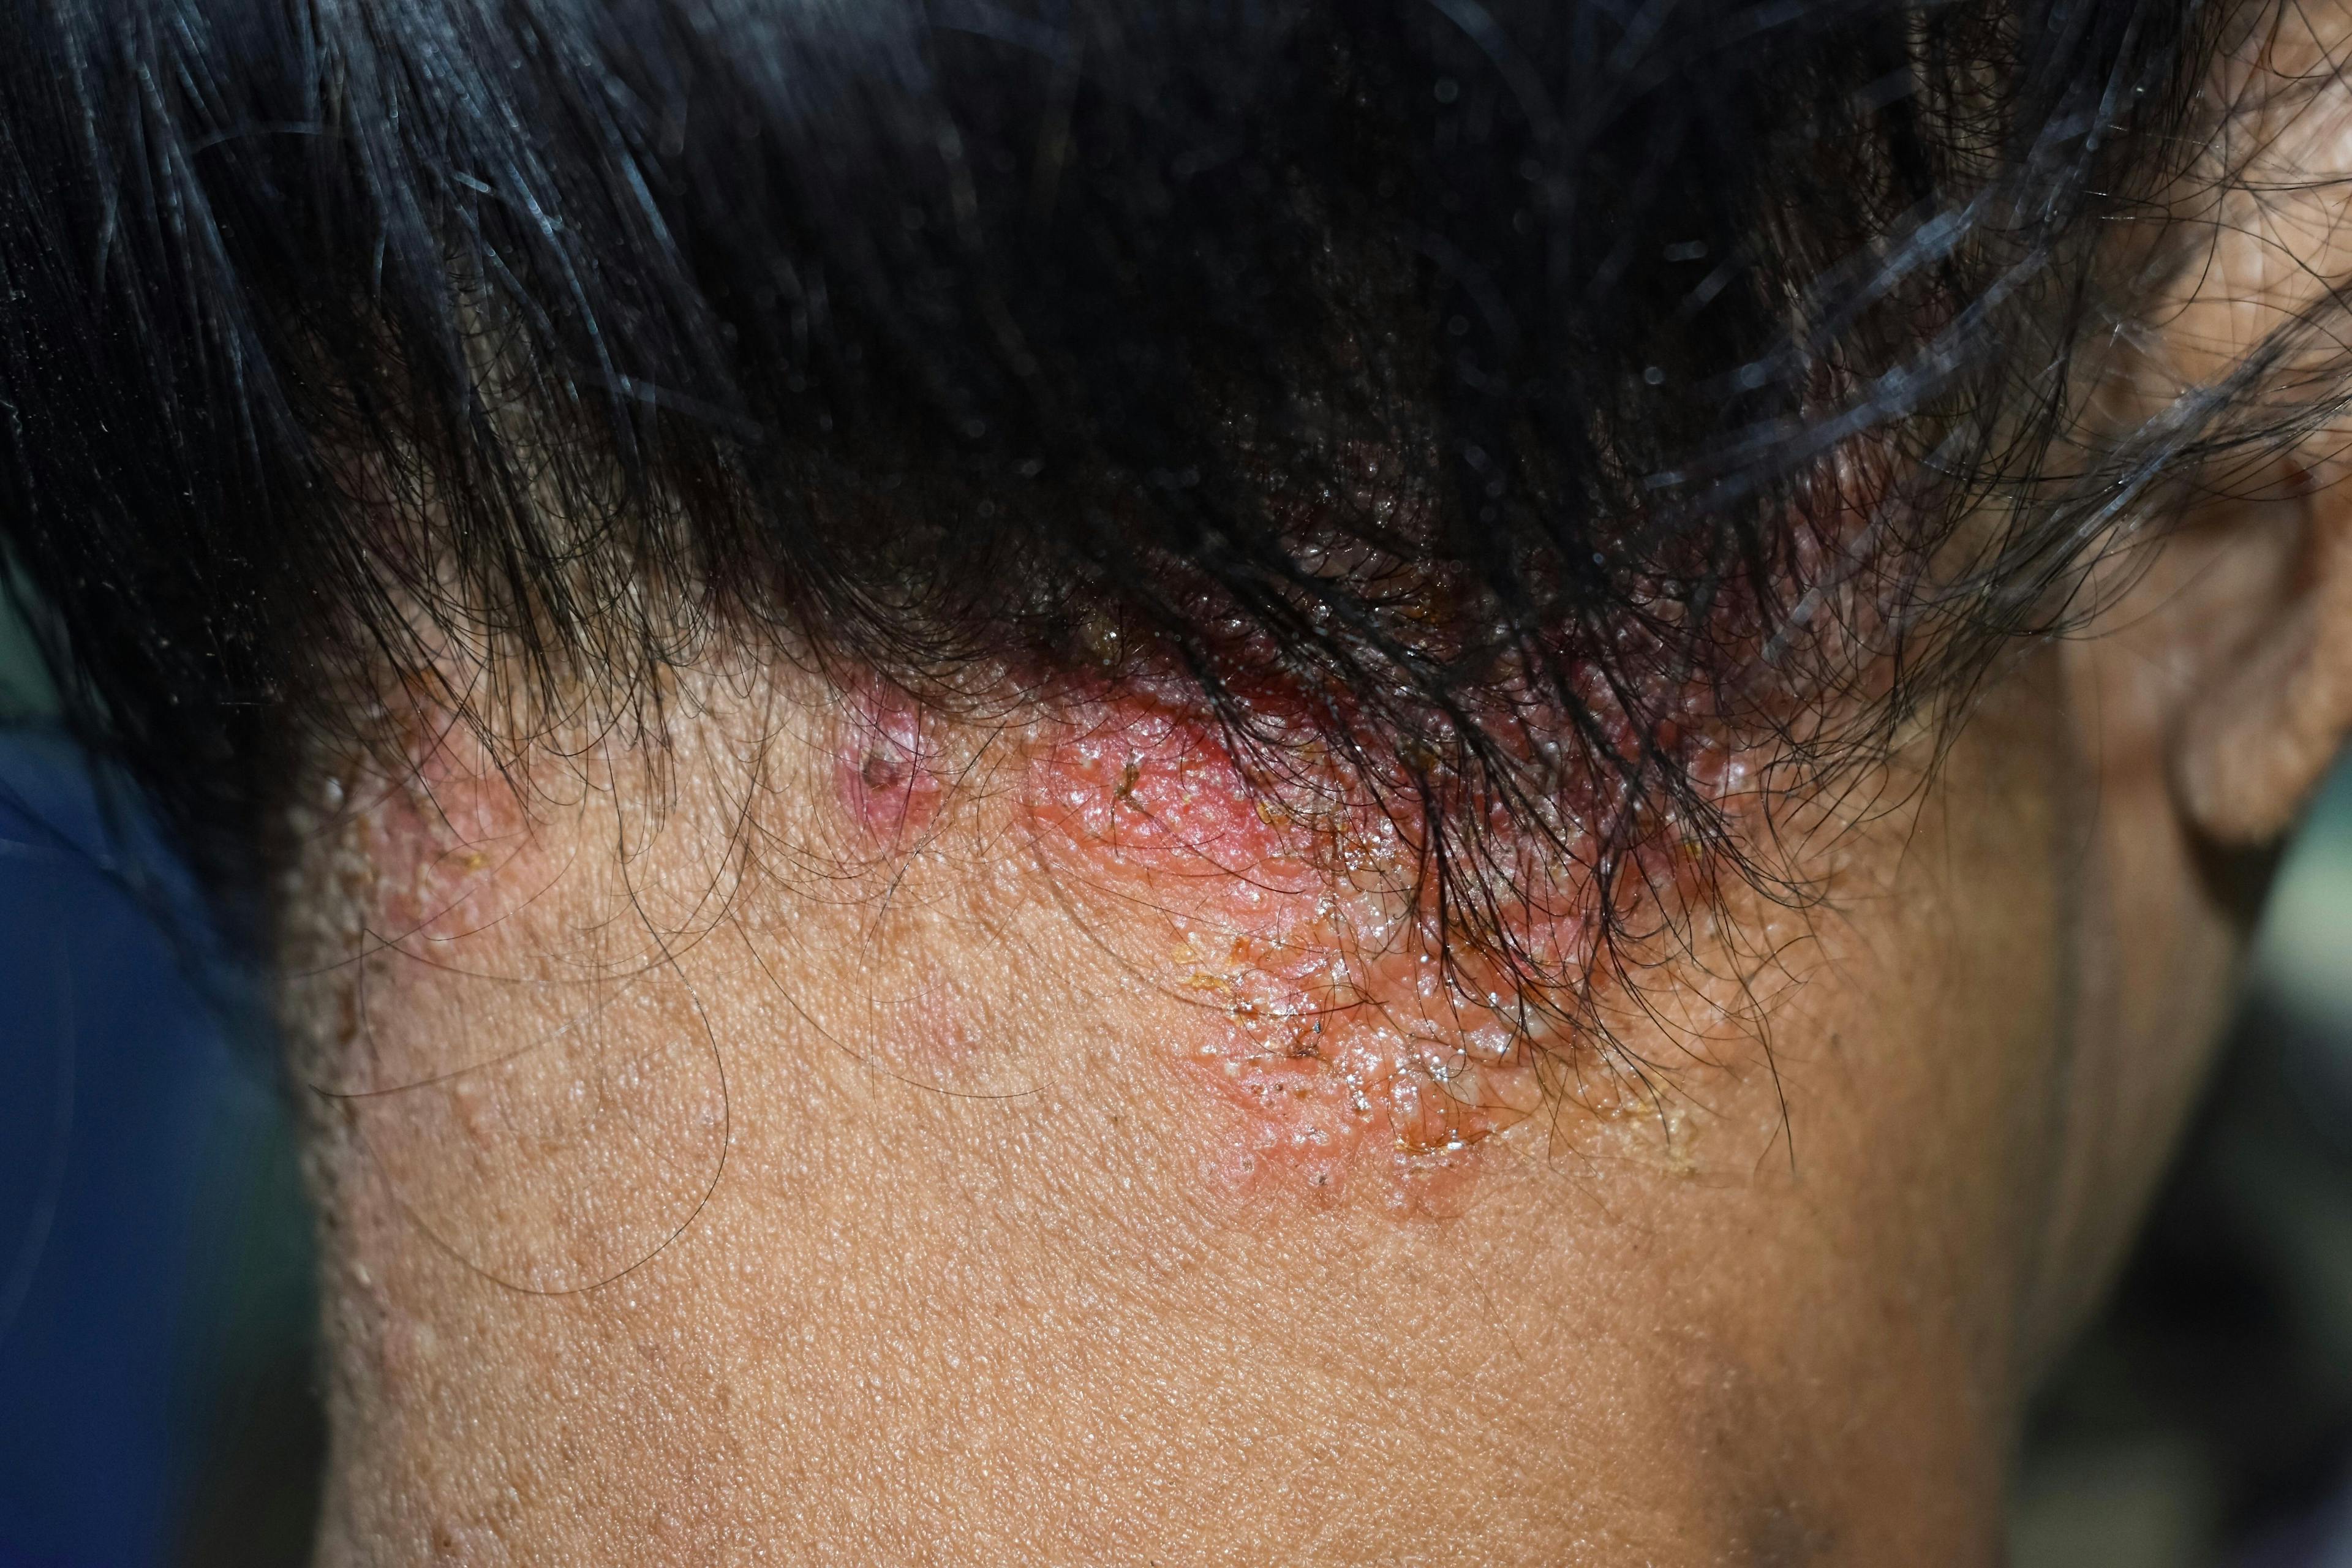 Skin Responses Differ Among Patients With Seborrheic Dermatitis and Rosacea